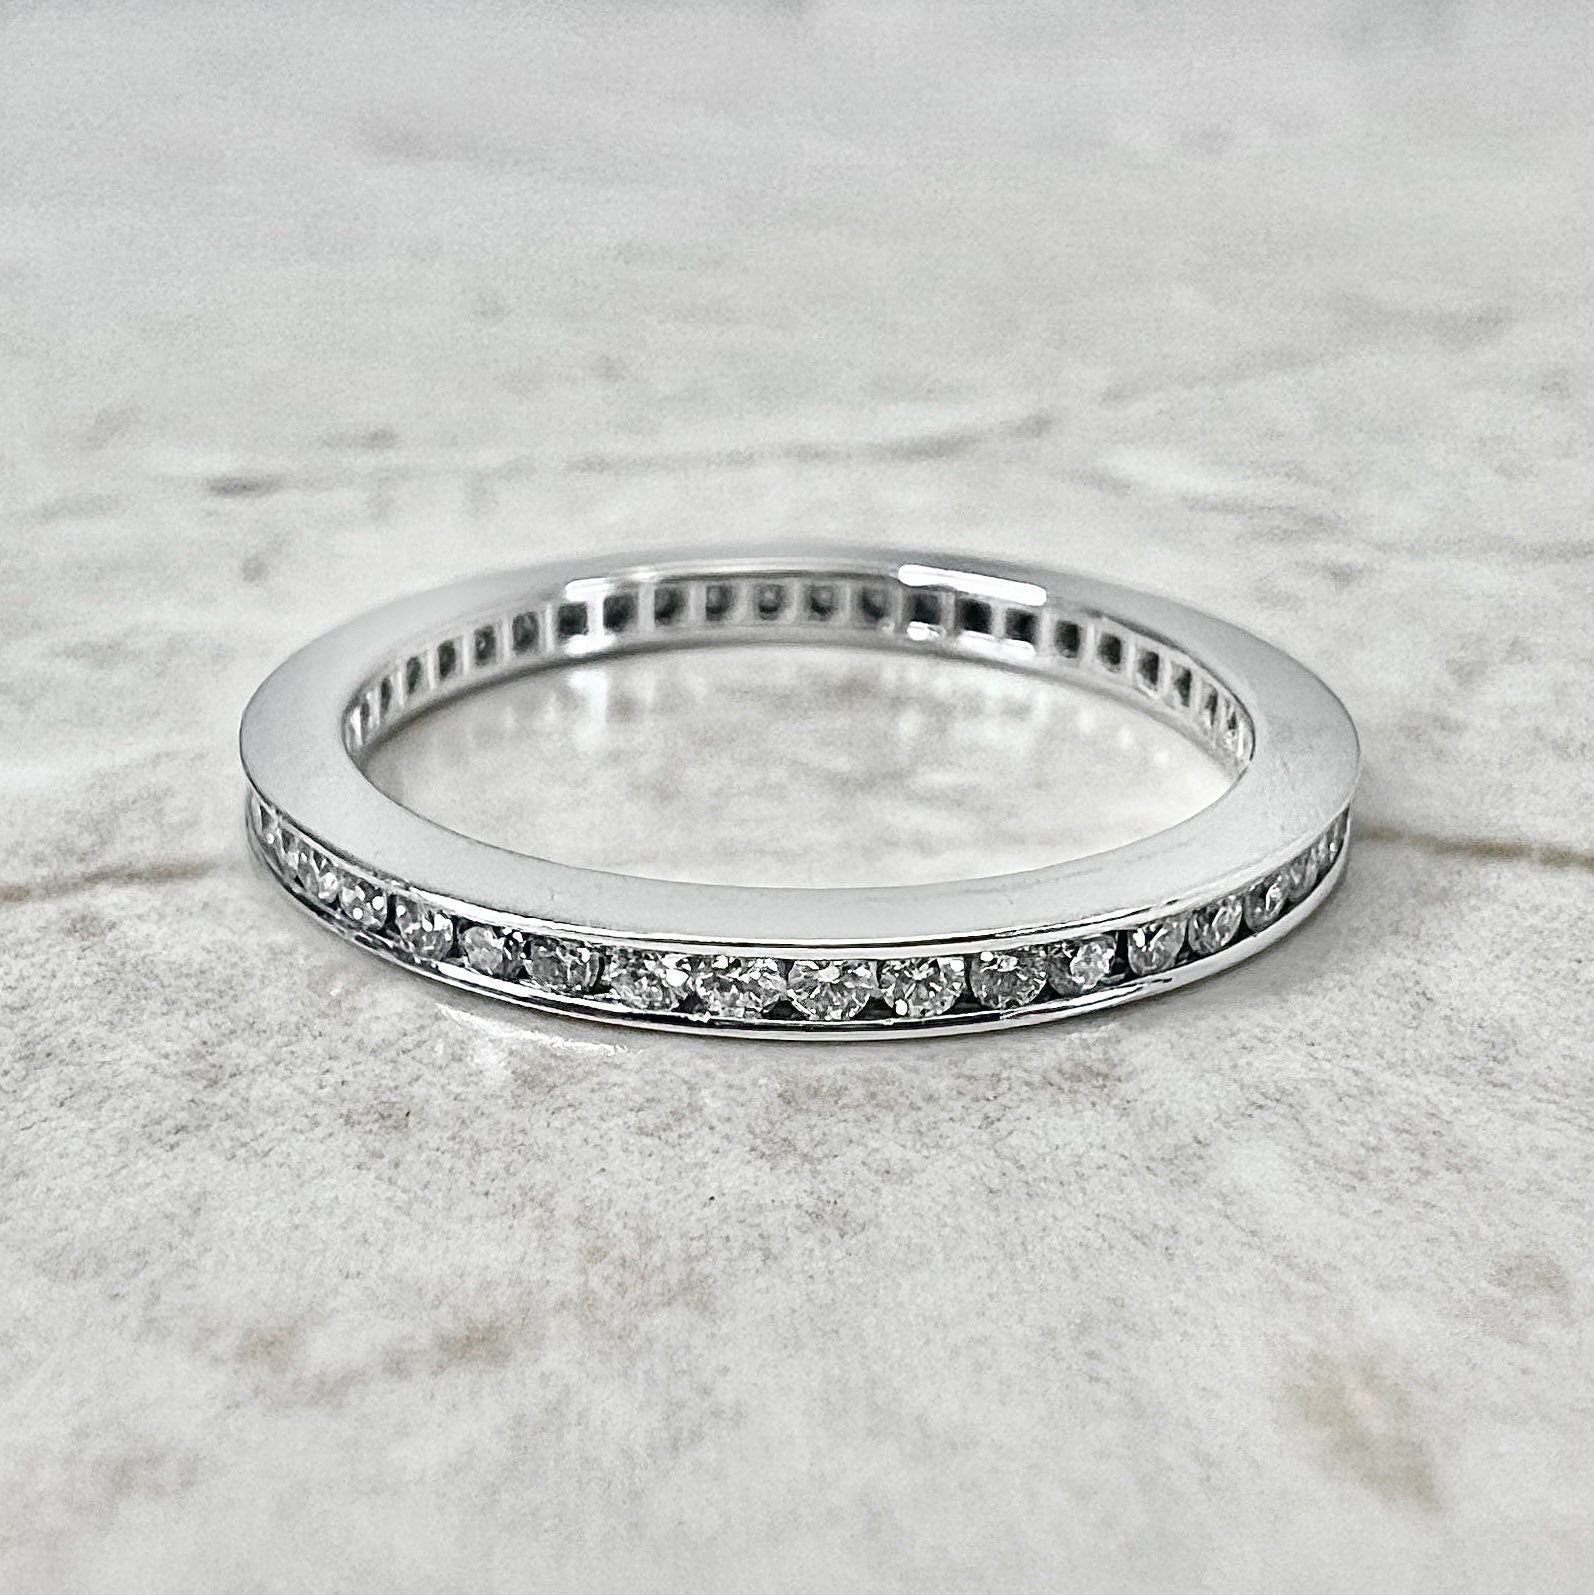 Fine Handcrafted Platinum Round Diamond Eternity Band Ring By Carvin French - Anniversary Ring - Best Gift For Her - Jewelry Sale